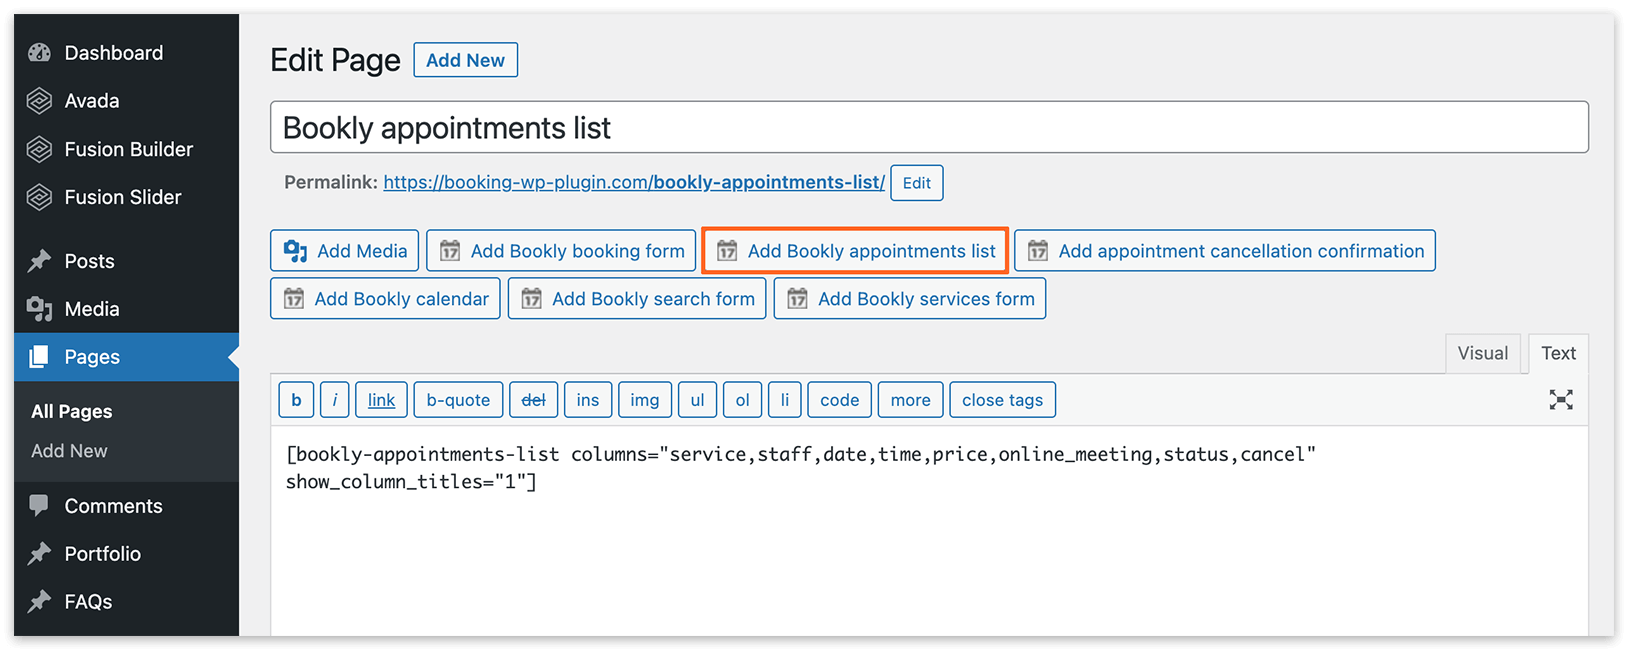 Add Bookly appointments list to a page